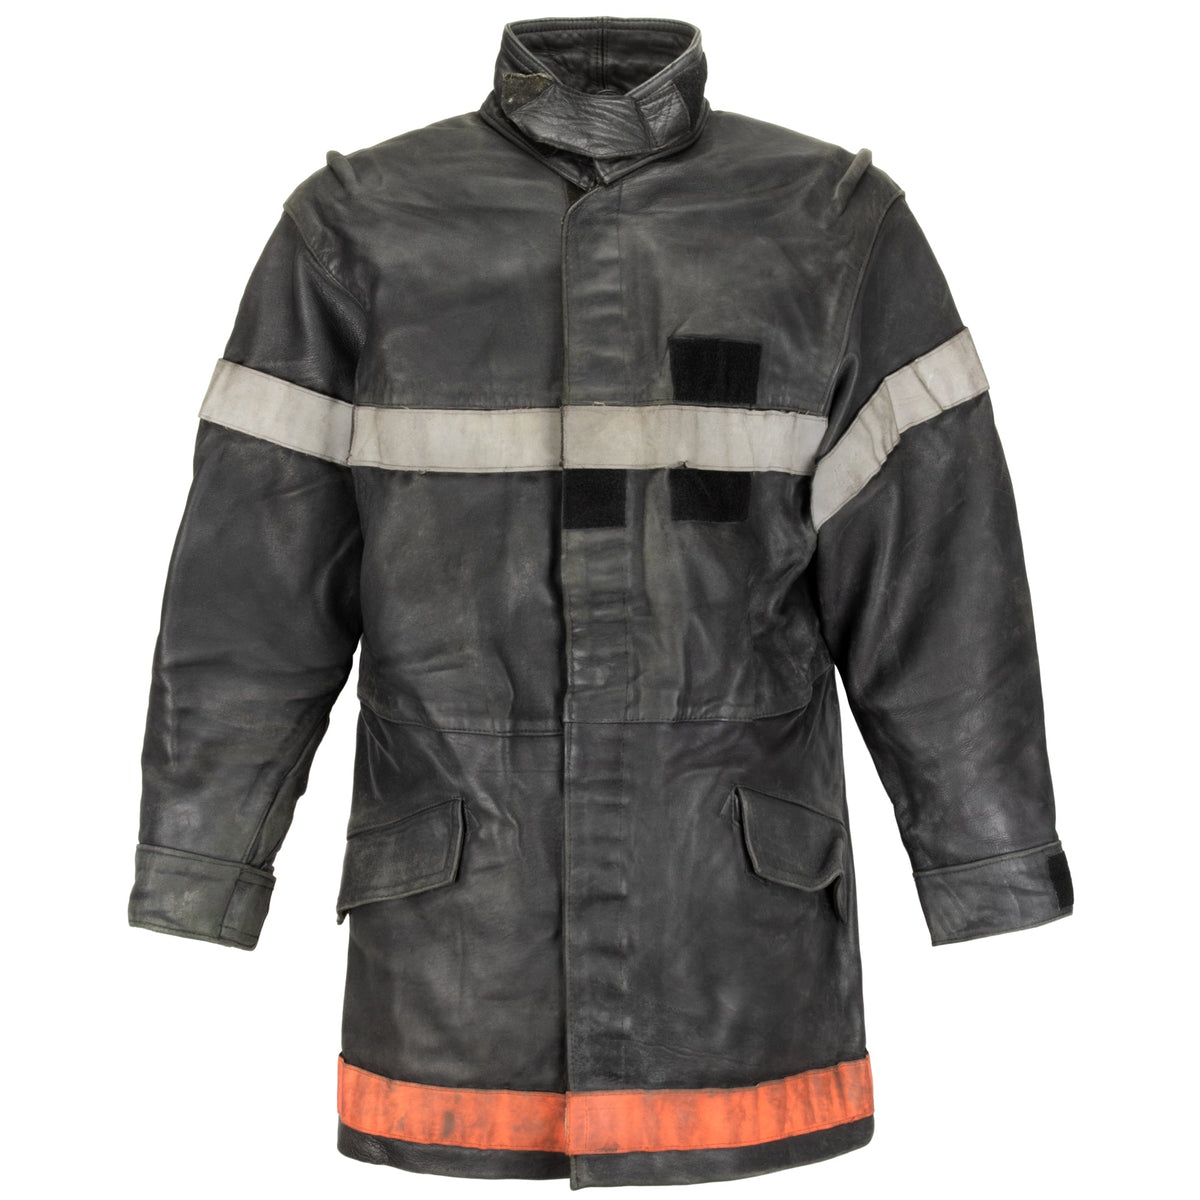 French Leather Firefighter Jacket [styles vary]